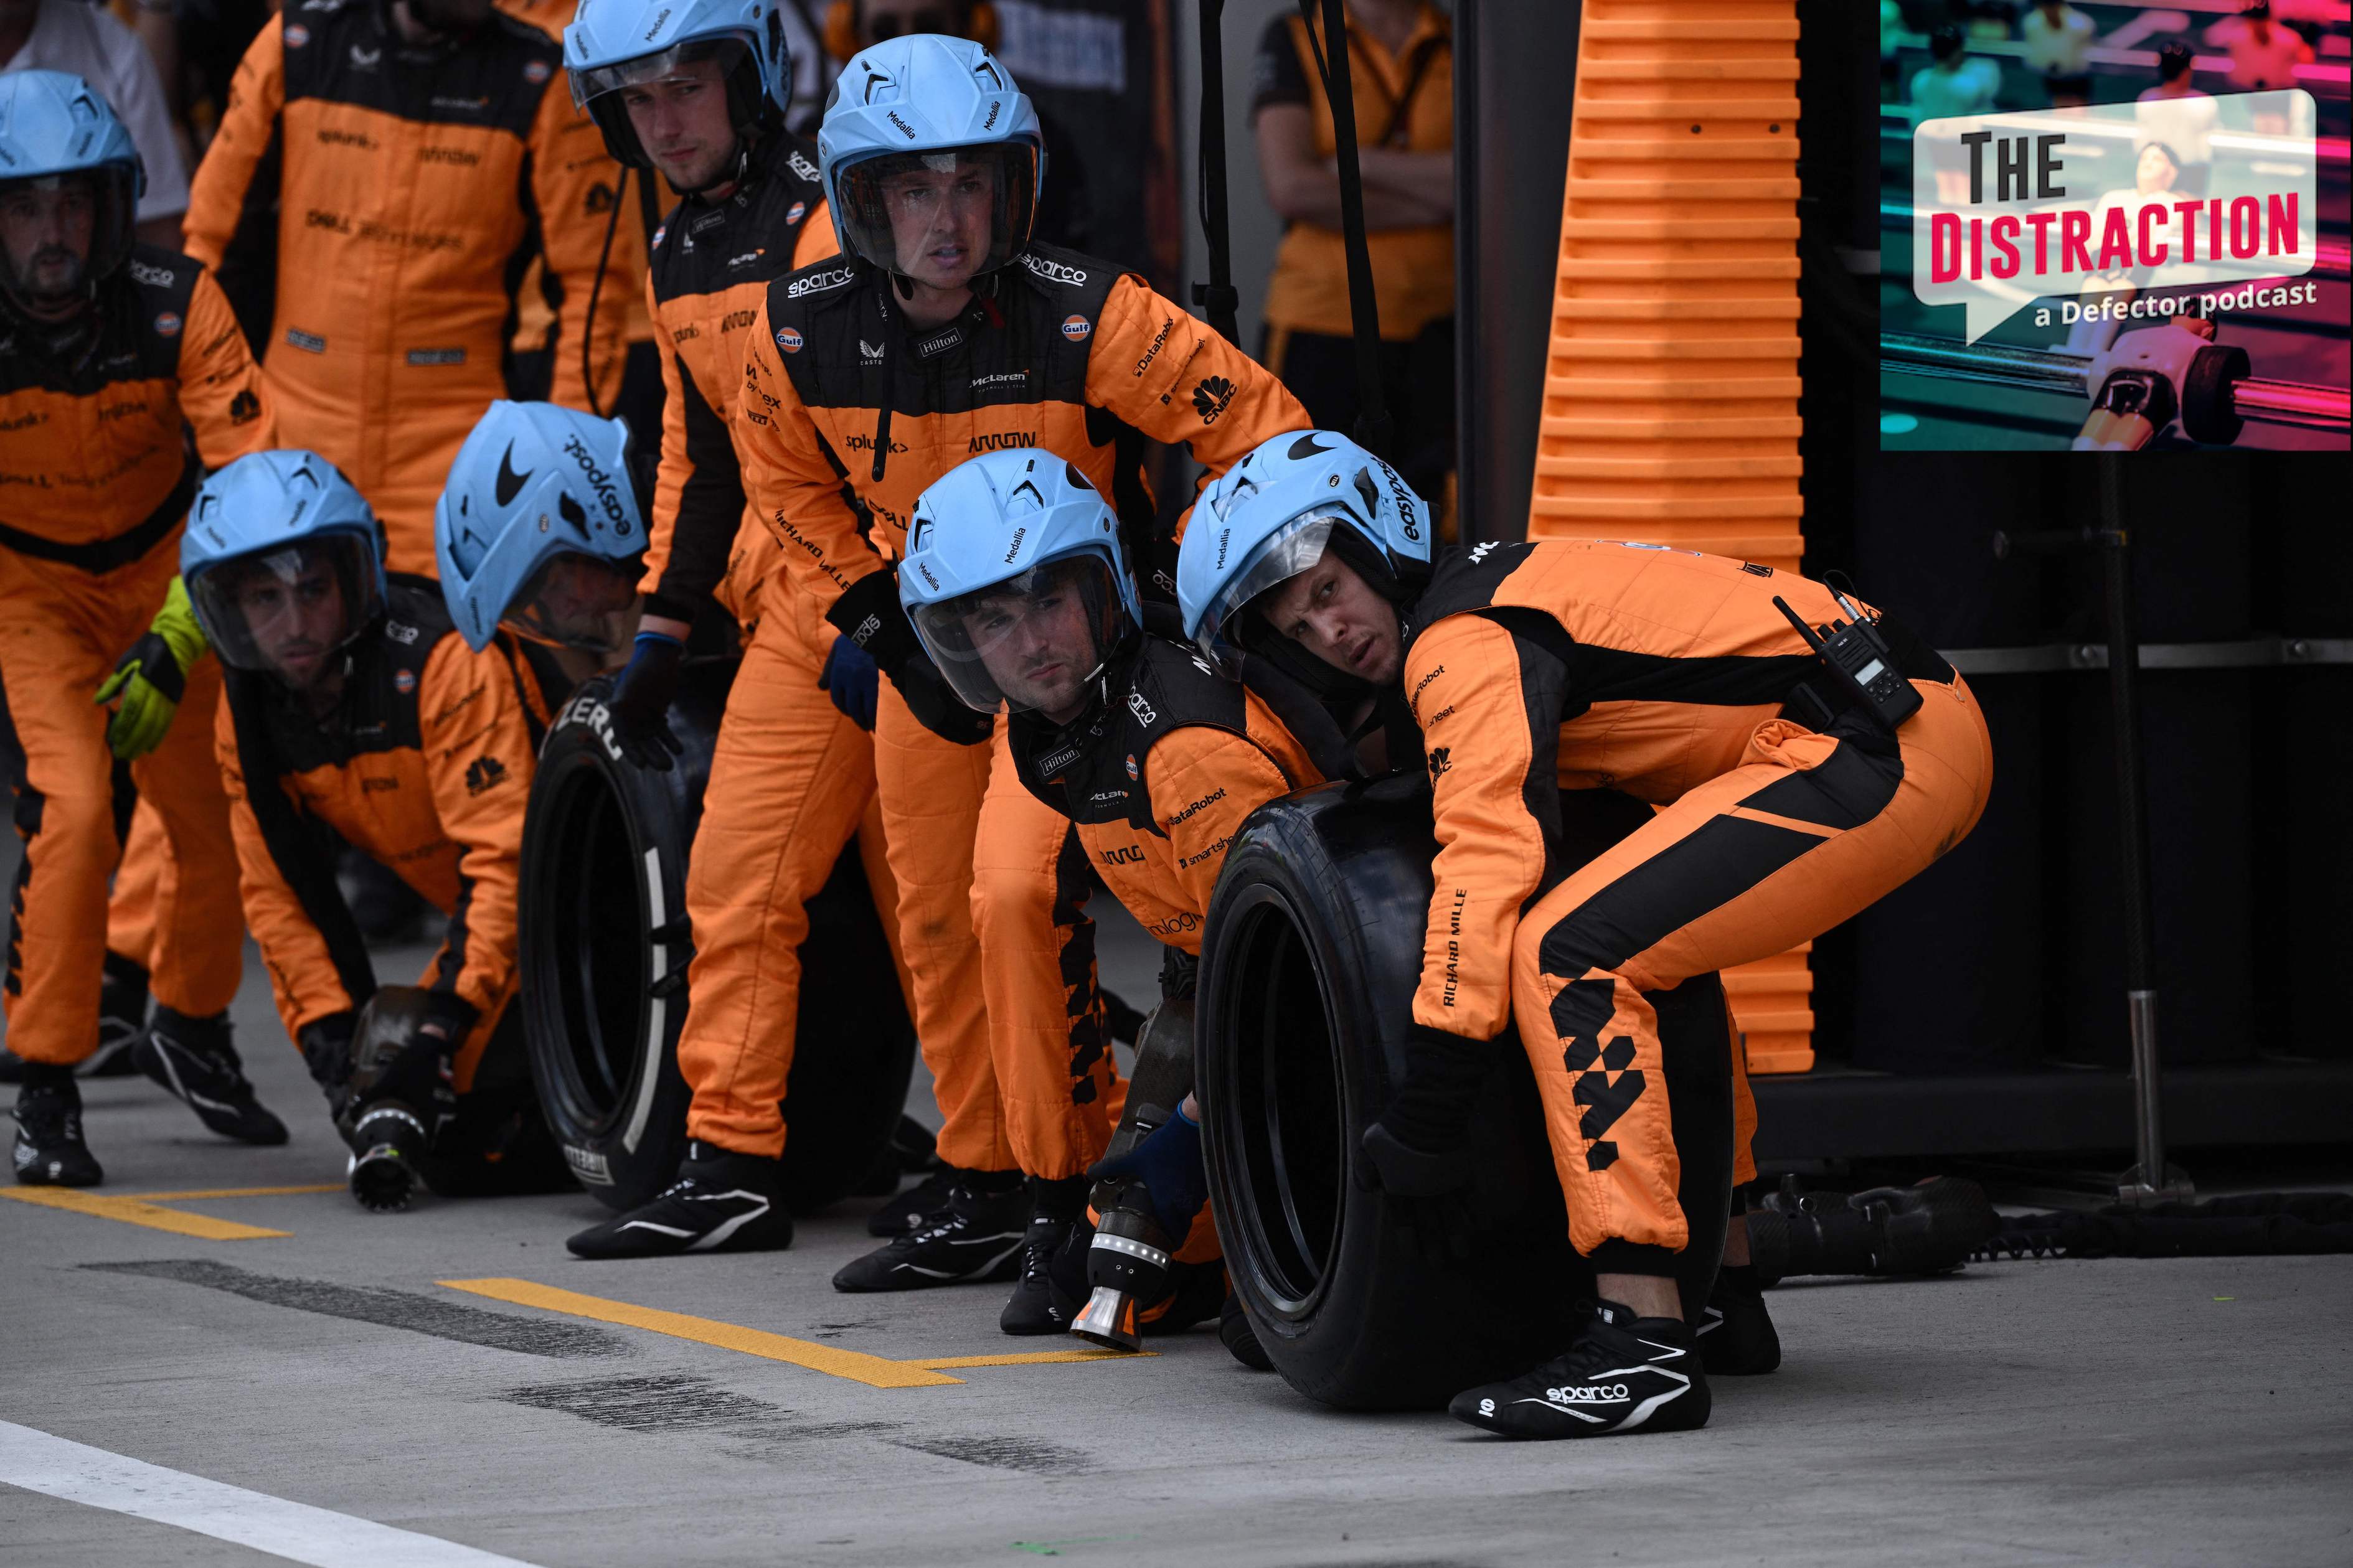 The McLaren pit crew gets ready for a driver during the Miami Formula One Grand Prix.